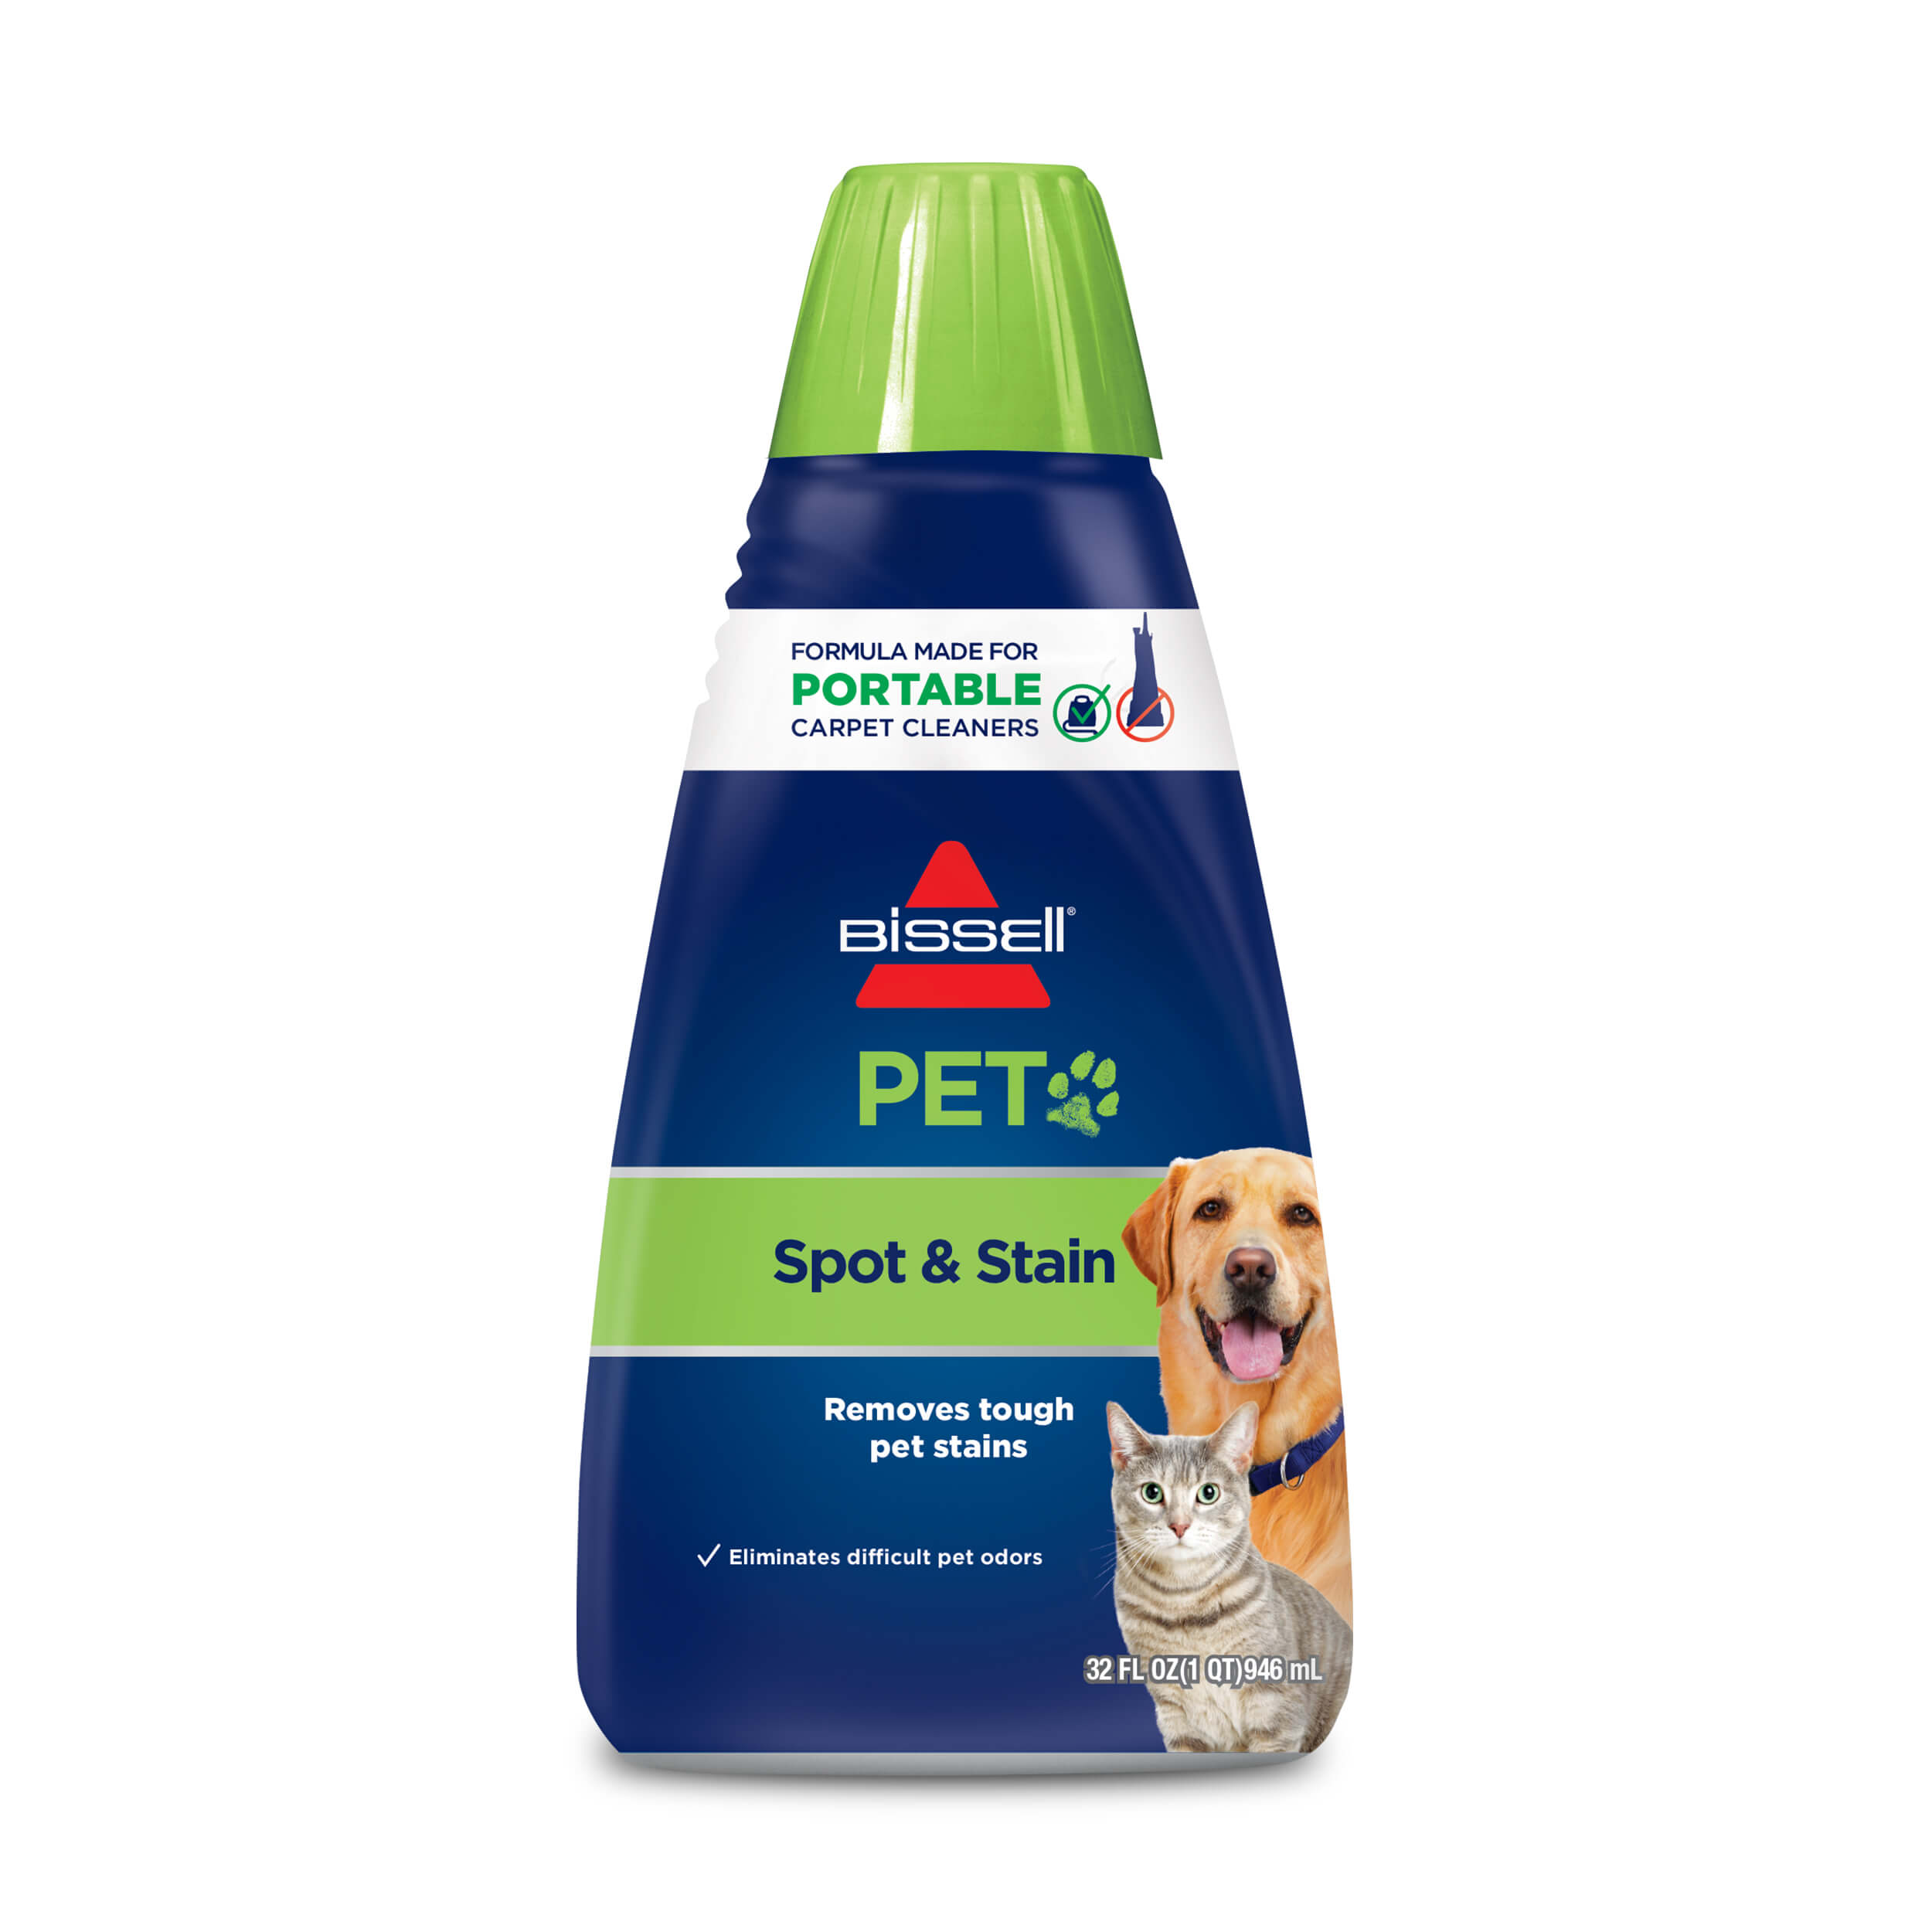 Pet cleaner. Пылесос Bissell Pet Cleaner. Bissell spot and Stain. Bissell "Pet Stain & Odor Remover". Bissell средство.